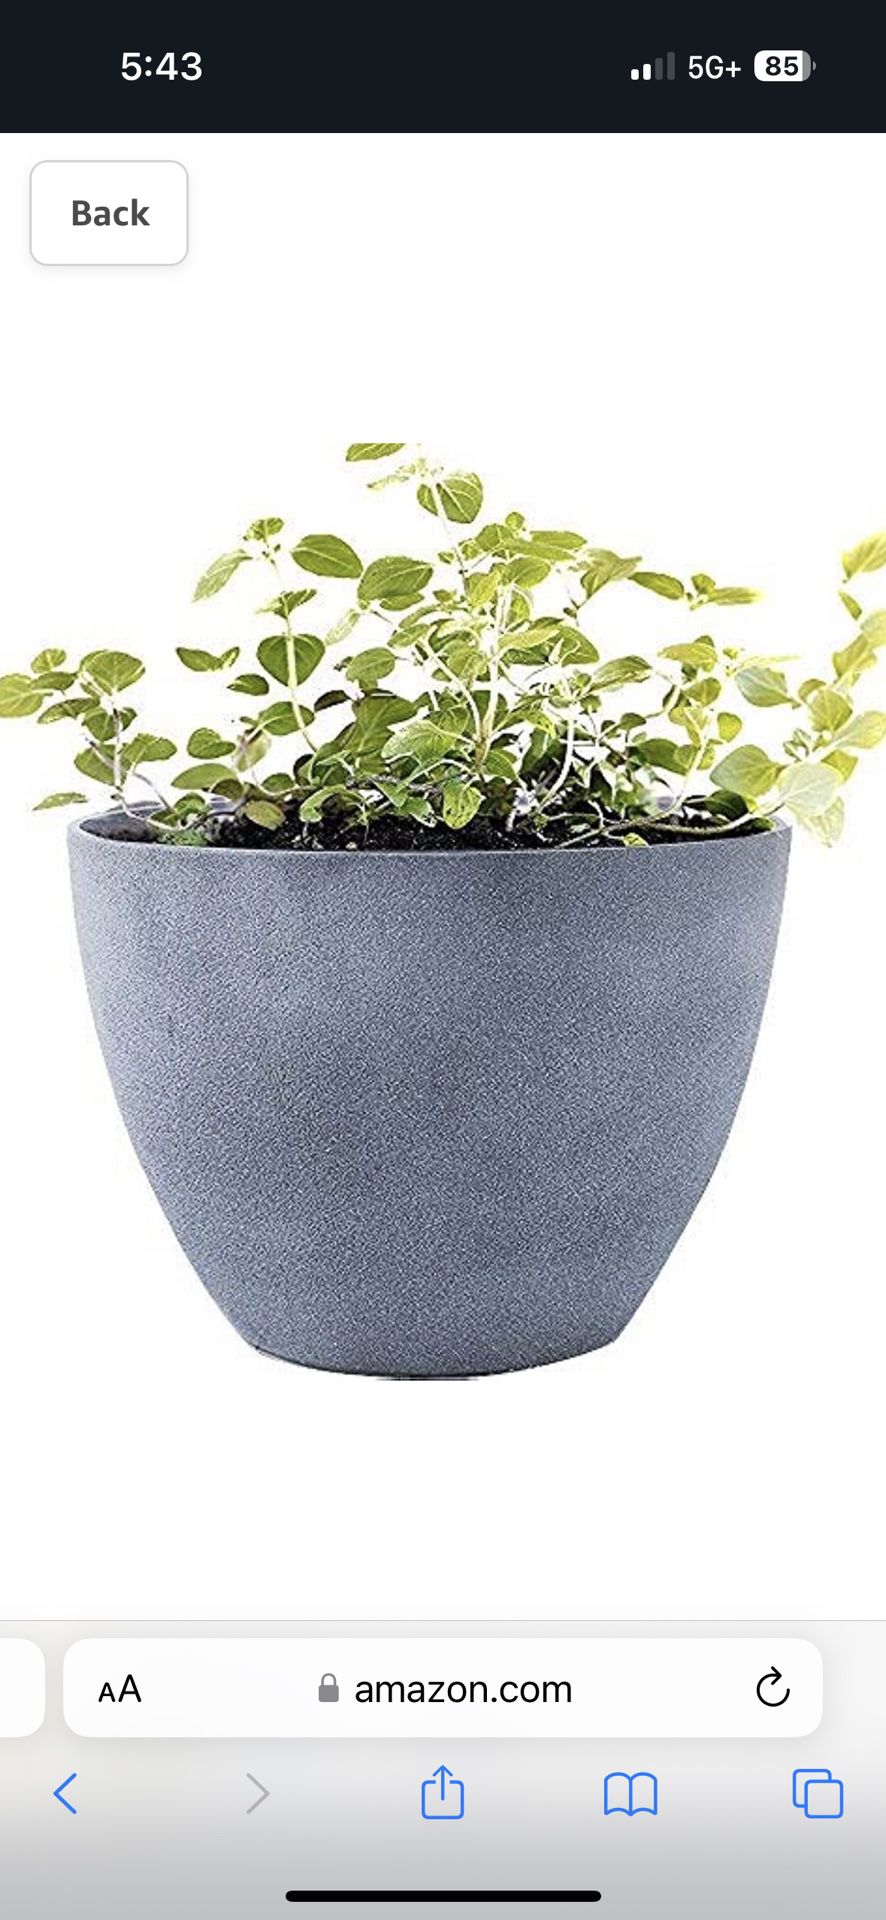 Reviews LA JOLIE MUSE Large Planter Outdoor Flower Pot, Garden Plant Container with Drainage Holes (Weathered Gray, 14.2 inch)